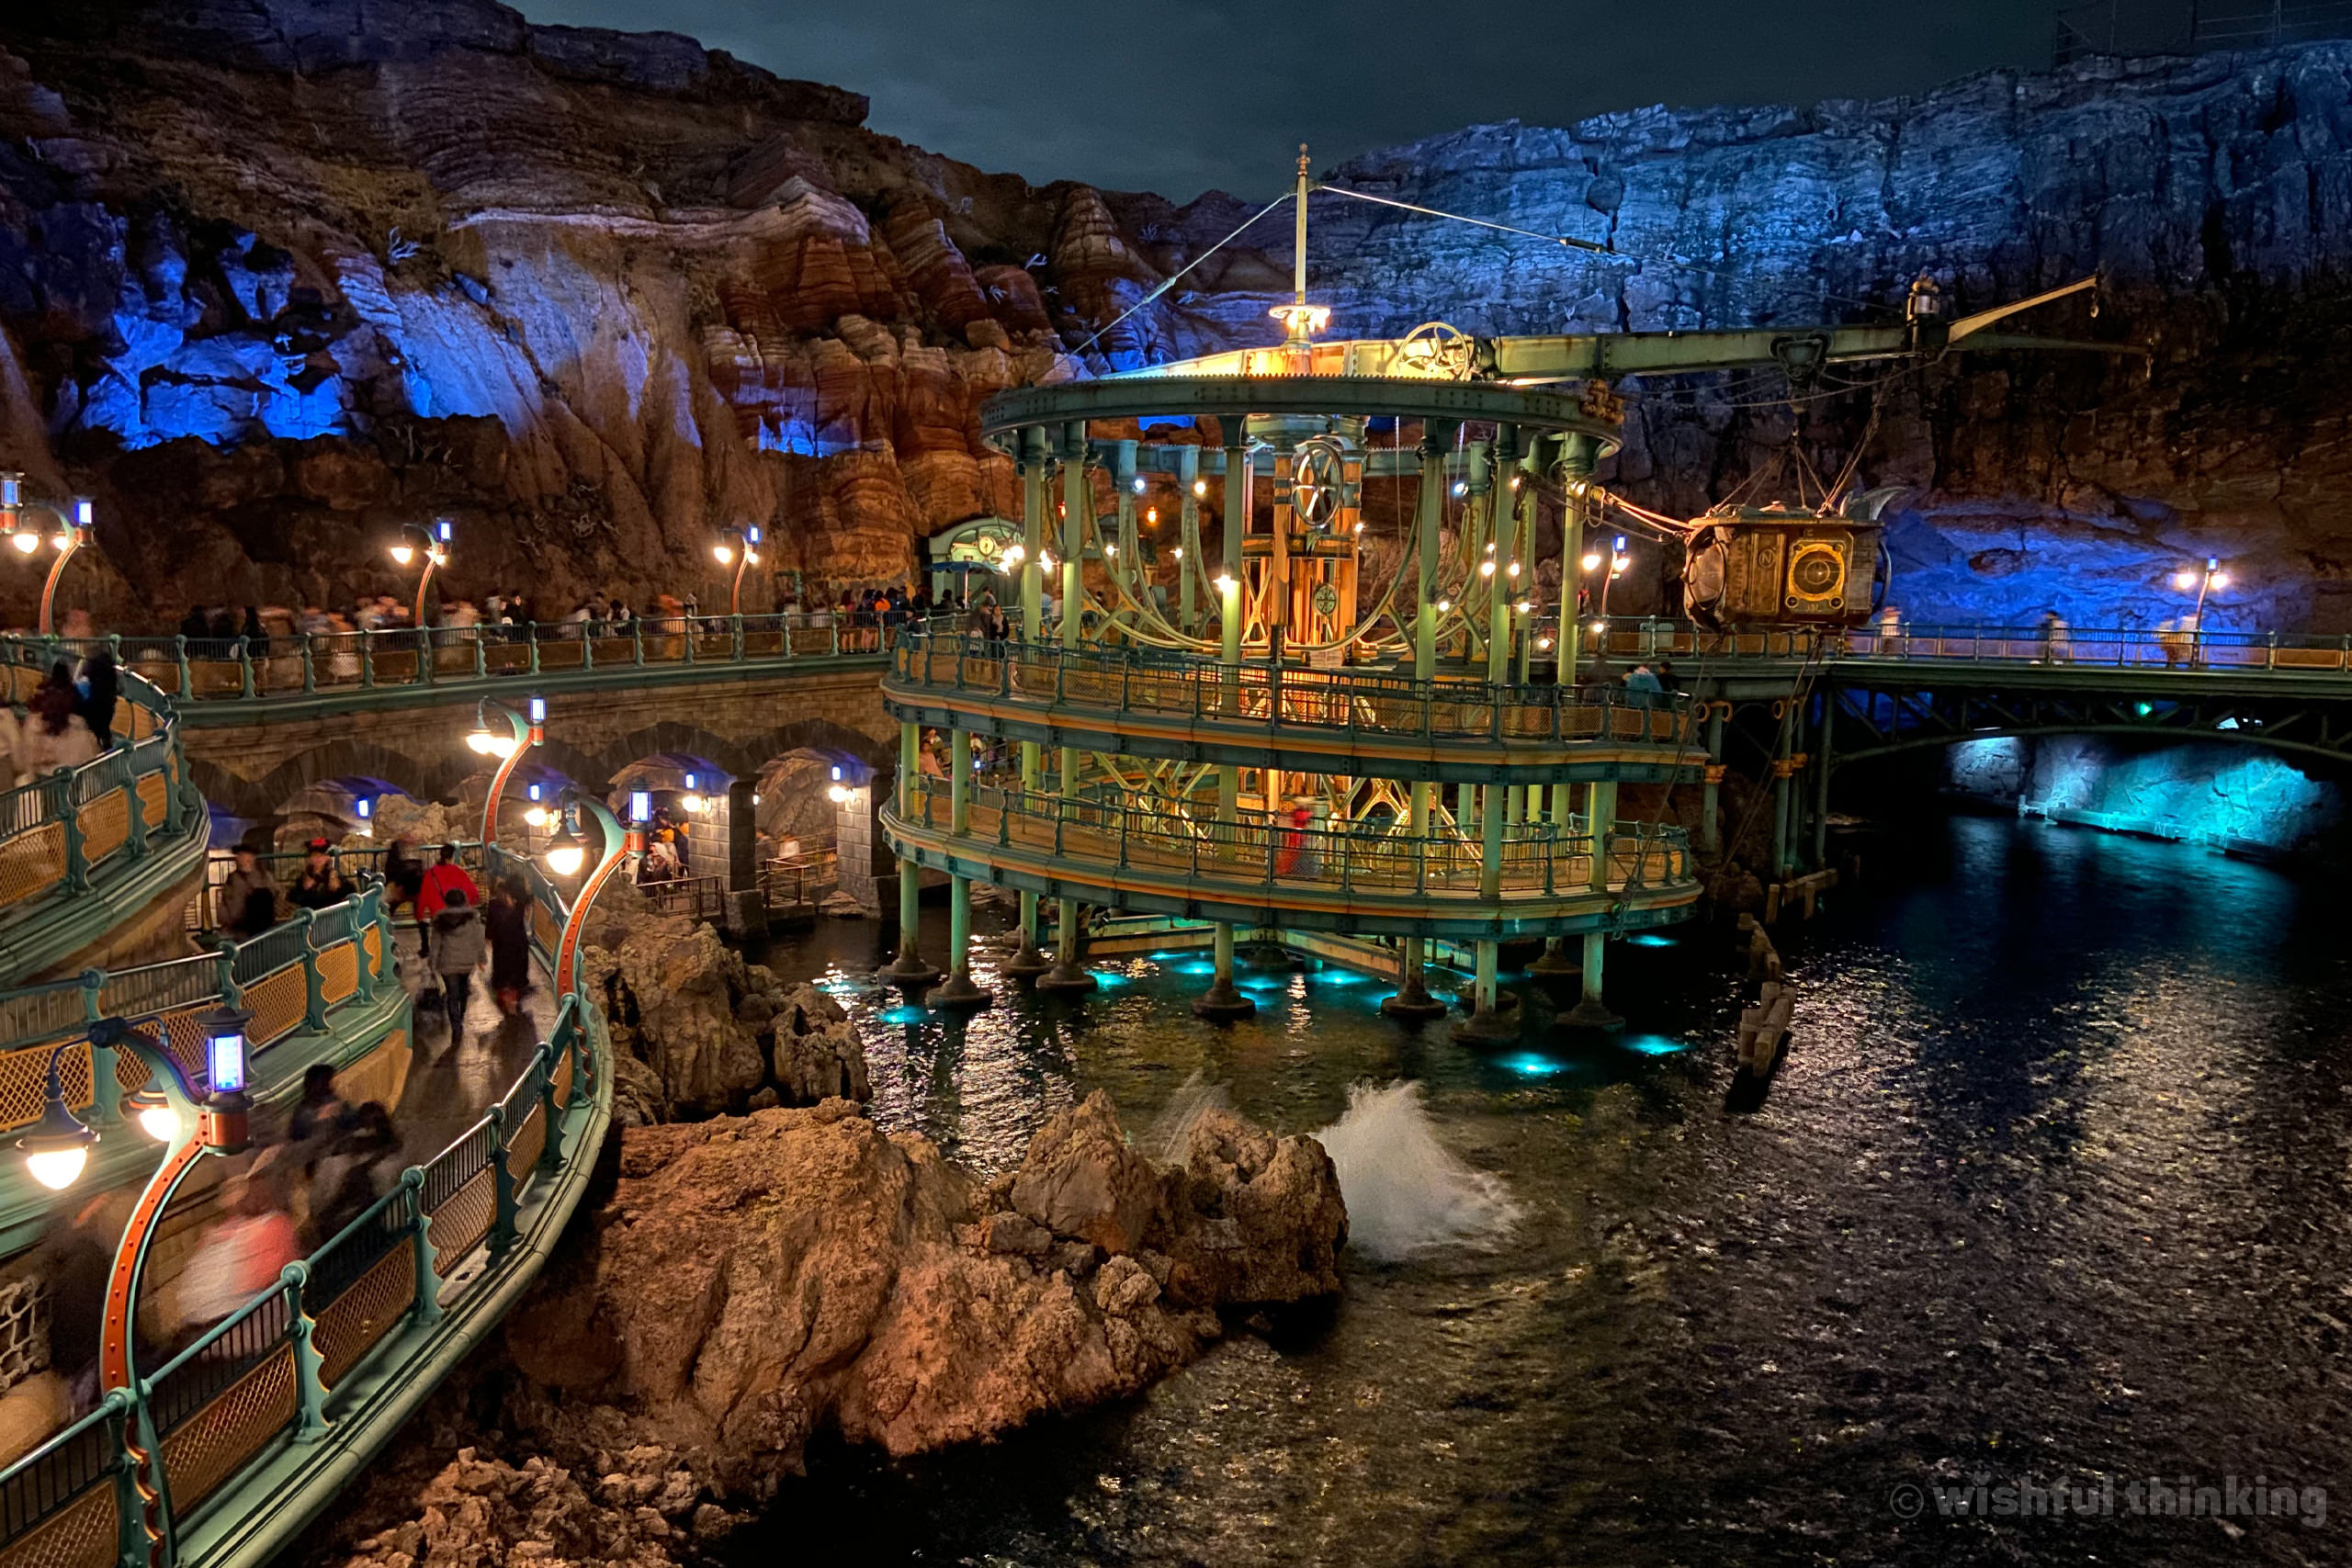 Tokyo DisneySea's 20,000 Leagues Under the Sea attraction invites guests into the depths of Jules Verne's imagination